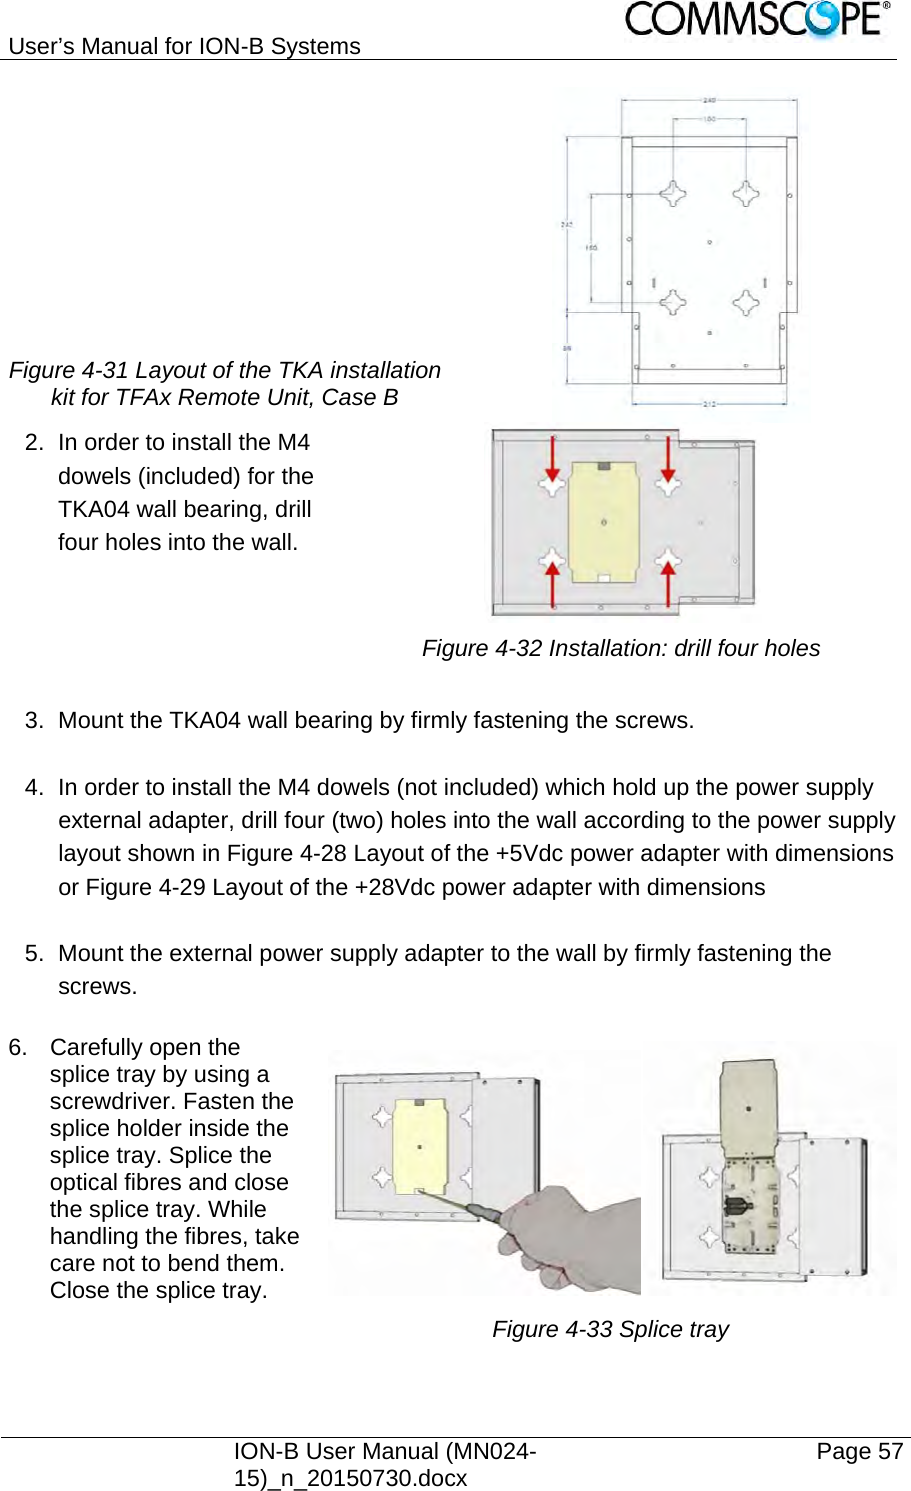 User’s Manual for ION-B Systems    ION-B User Manual (MN024-15)_n_20150730.docx  Page 57 Figure 4-31 Layout of the TKA installation kit for TFAx Remote Unit, Case B   2.  In order to install the M4 dowels (included) for the TKA04 wall bearing, drill four holes into the wall.    Figure 4-32 Installation: drill four holes   3.  Mount the TKA04 wall bearing by firmly fastening the screws.  4.  In order to install the M4 dowels (not included) which hold up the power supply external adapter, drill four (two) holes into the wall according to the power supply layout shown in Figure 4-28 Layout of the +5Vdc power adapter with dimensions or Figure 4-29 Layout of the +28Vdc power adapter with dimensions  5.  Mount the external power supply adapter to the wall by firmly fastening the screws.  6.  Carefully open the splice tray by using a screwdriver. Fasten the splice holder inside the splice tray. Splice the optical fibres and close the splice tray. While handling the fibres, take care not to bend them. Close the splice tray.   Figure 4-33 Splice tray 